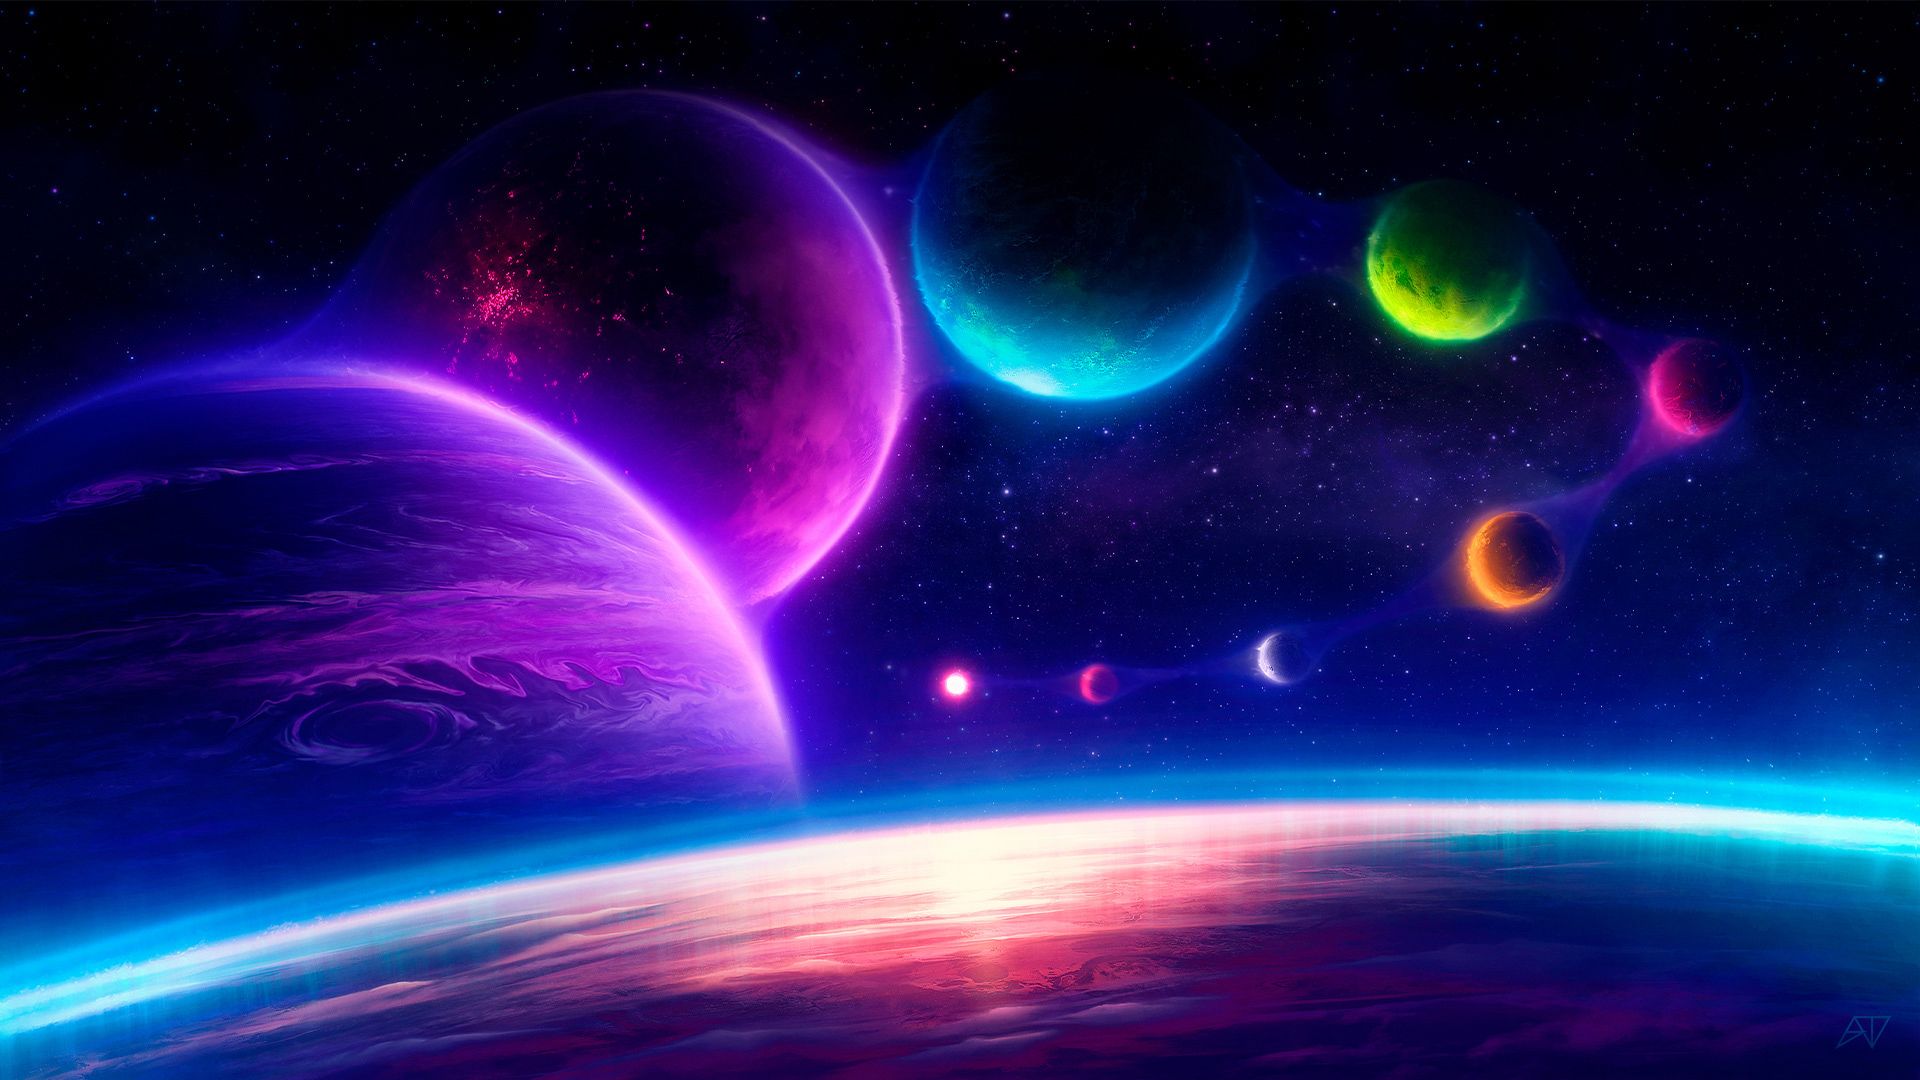 Desktop wallpaper artwork, jelly sky, planets, HD image, picture, background, dce3b5